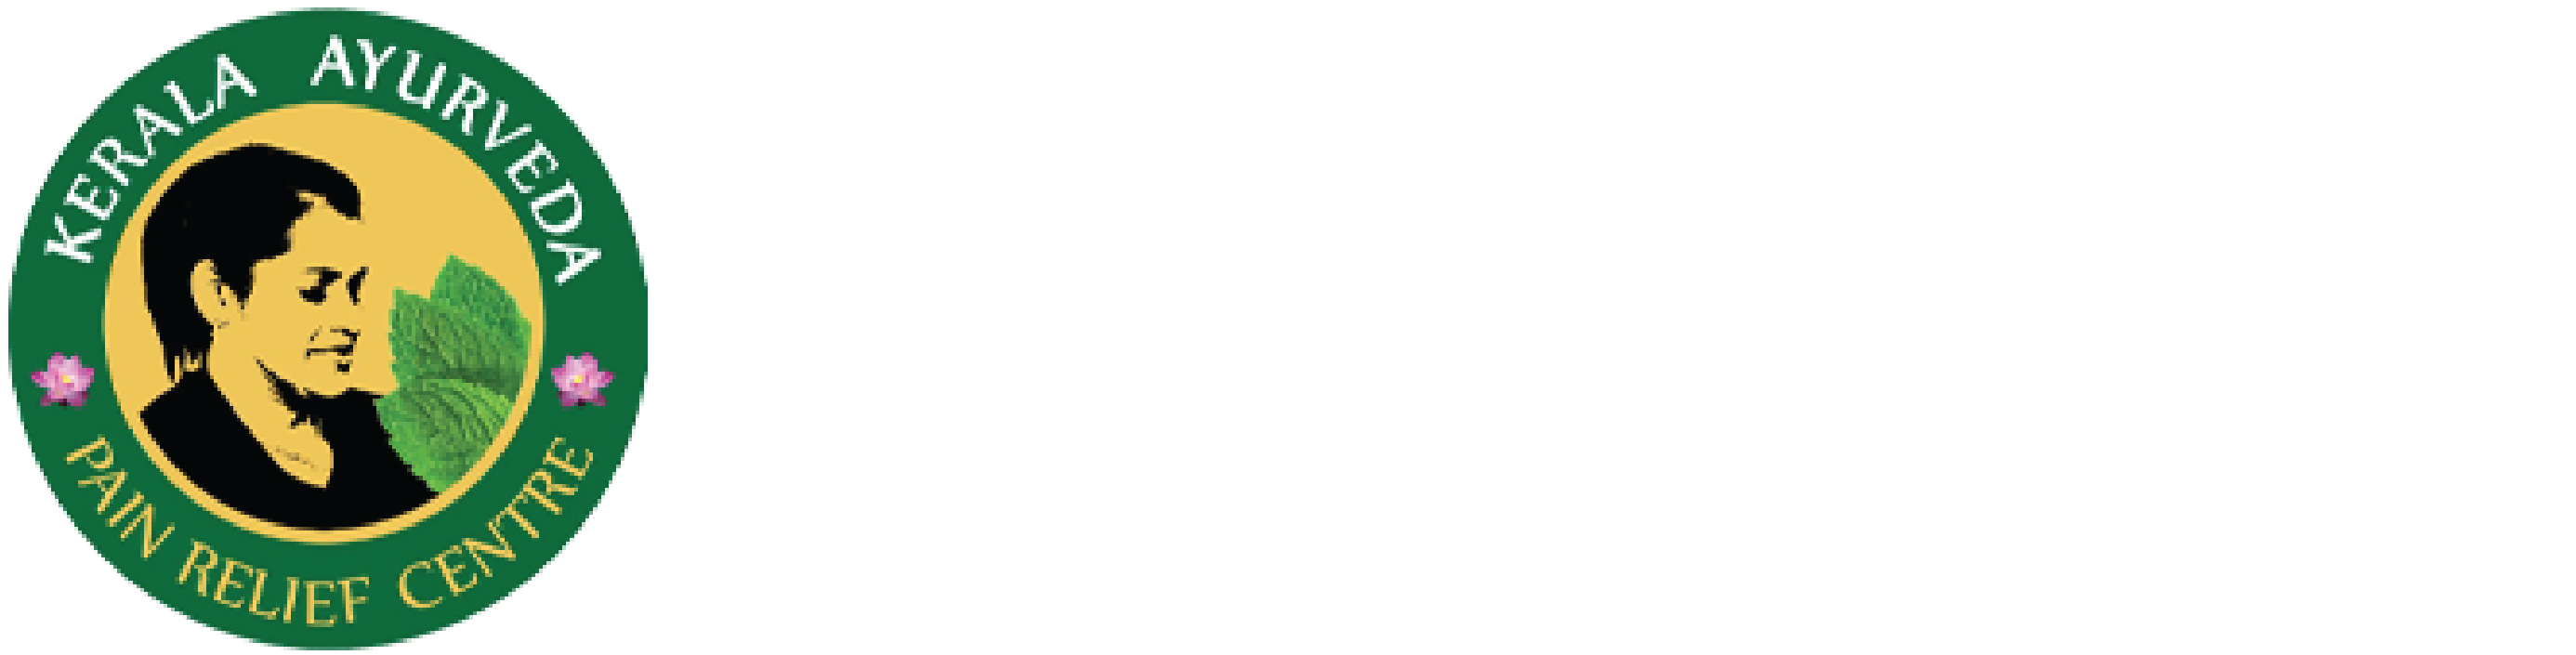 Welcome to Kerala Ayurveda Pain Relief Centre UK